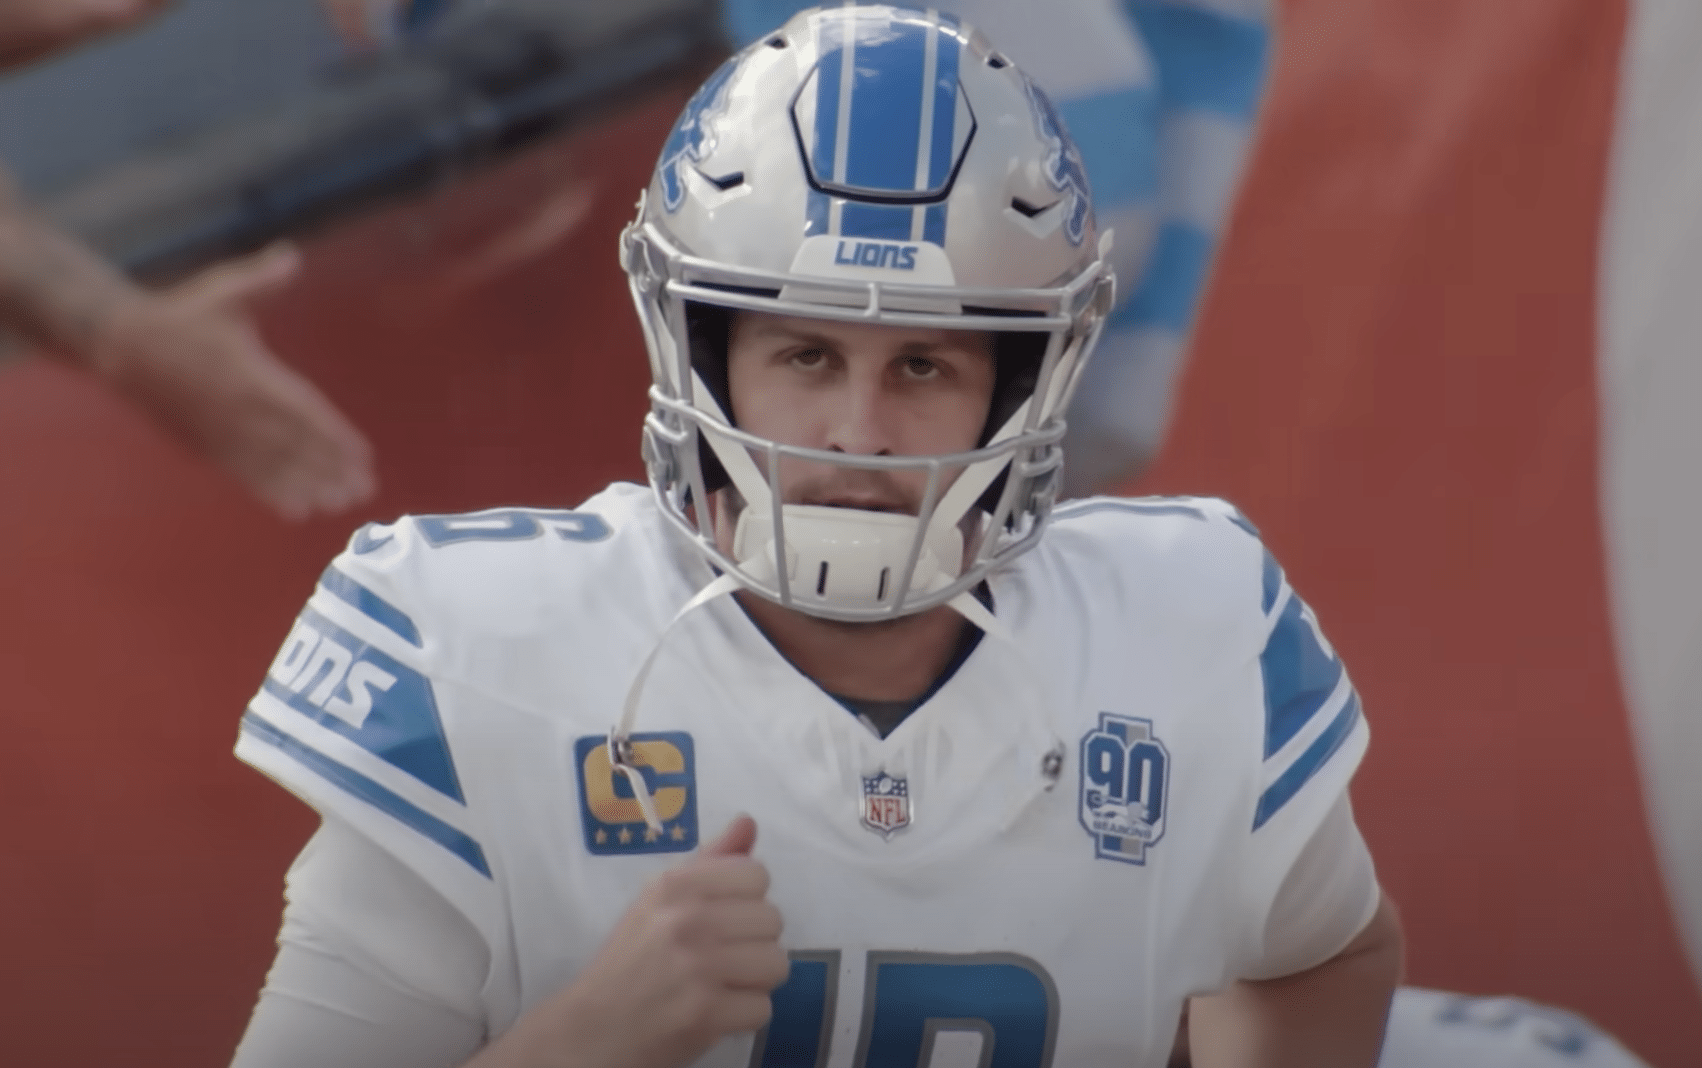 Detroit Lions starting offense Jared Goff Pro Football Focus Grade Detroit Lions PFF grades vs. Chargers Detroit Lions starting offense Jared Goff on balling out Jared Goff says Detroit Lions are not satisfied Jared Goff takes to social media